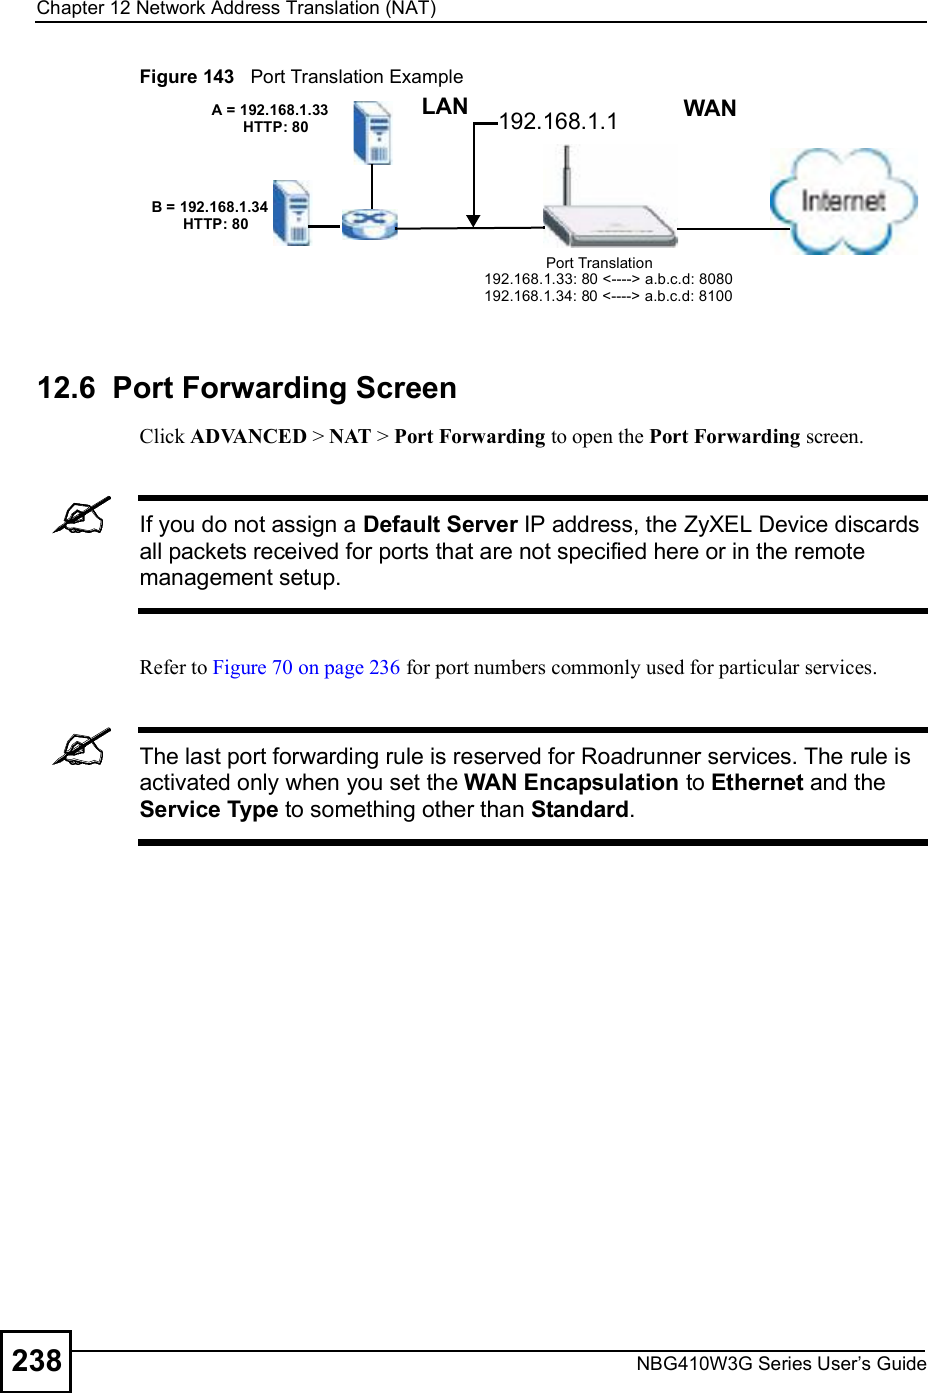 Chapter 12Network Address Translation (NAT)NBG410W3G Series User s Guide238Figure 143   Port Translation Example12.6  Port Forwarding Screen Click ADVANCED &gt; NAT &gt; Port Forwarding to open the Port Forwarding screen. If you do not assign a Default Server IP address, the ZyXEL Device discards all packets received for ports that are not specified here or in the remote management setup.Refer to Figure 70 on page 236 for port numbers commonly used for particular services. The last port forwarding rule is reserved for Roadrunner services. The rule is activated only when you set the WAN Encapsulation to Ethernet and the Service Type to something other than Standard.A = 192.168.1.33HTTP: 80B = 192.168.1.34HTTP: 80LAN WAN192.168.1.1Port Translation192.168.1.33: 80 &lt;----&gt; a.b.c.d: 8080192.168.1.34: 80 &lt;----&gt; a.b.c.d: 8100